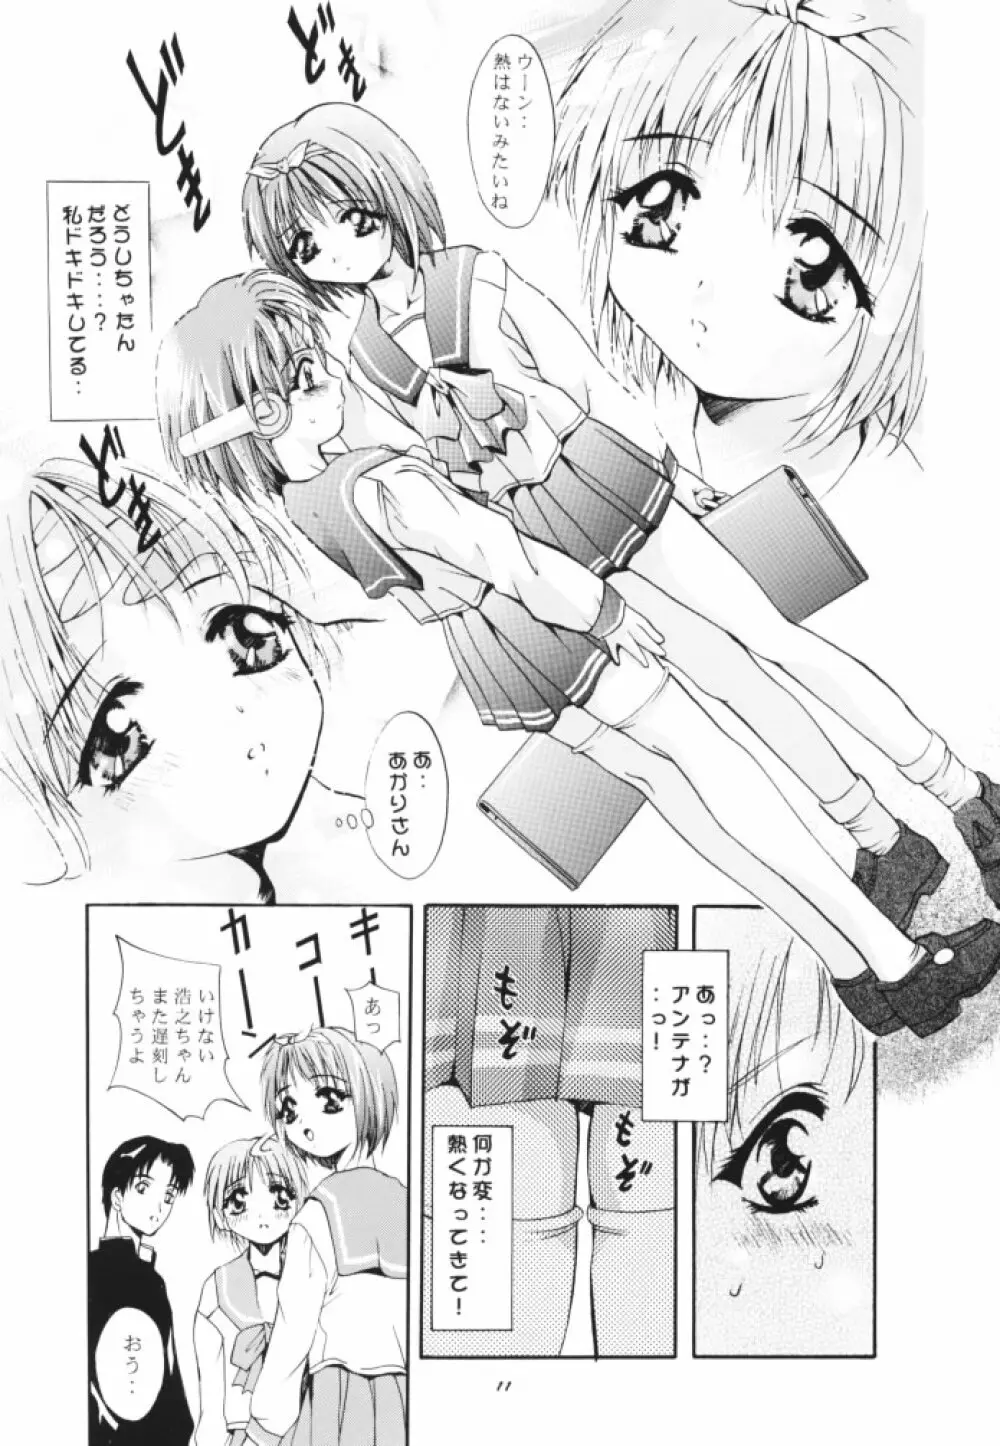 MOUSOU THEATER 11 10ページ